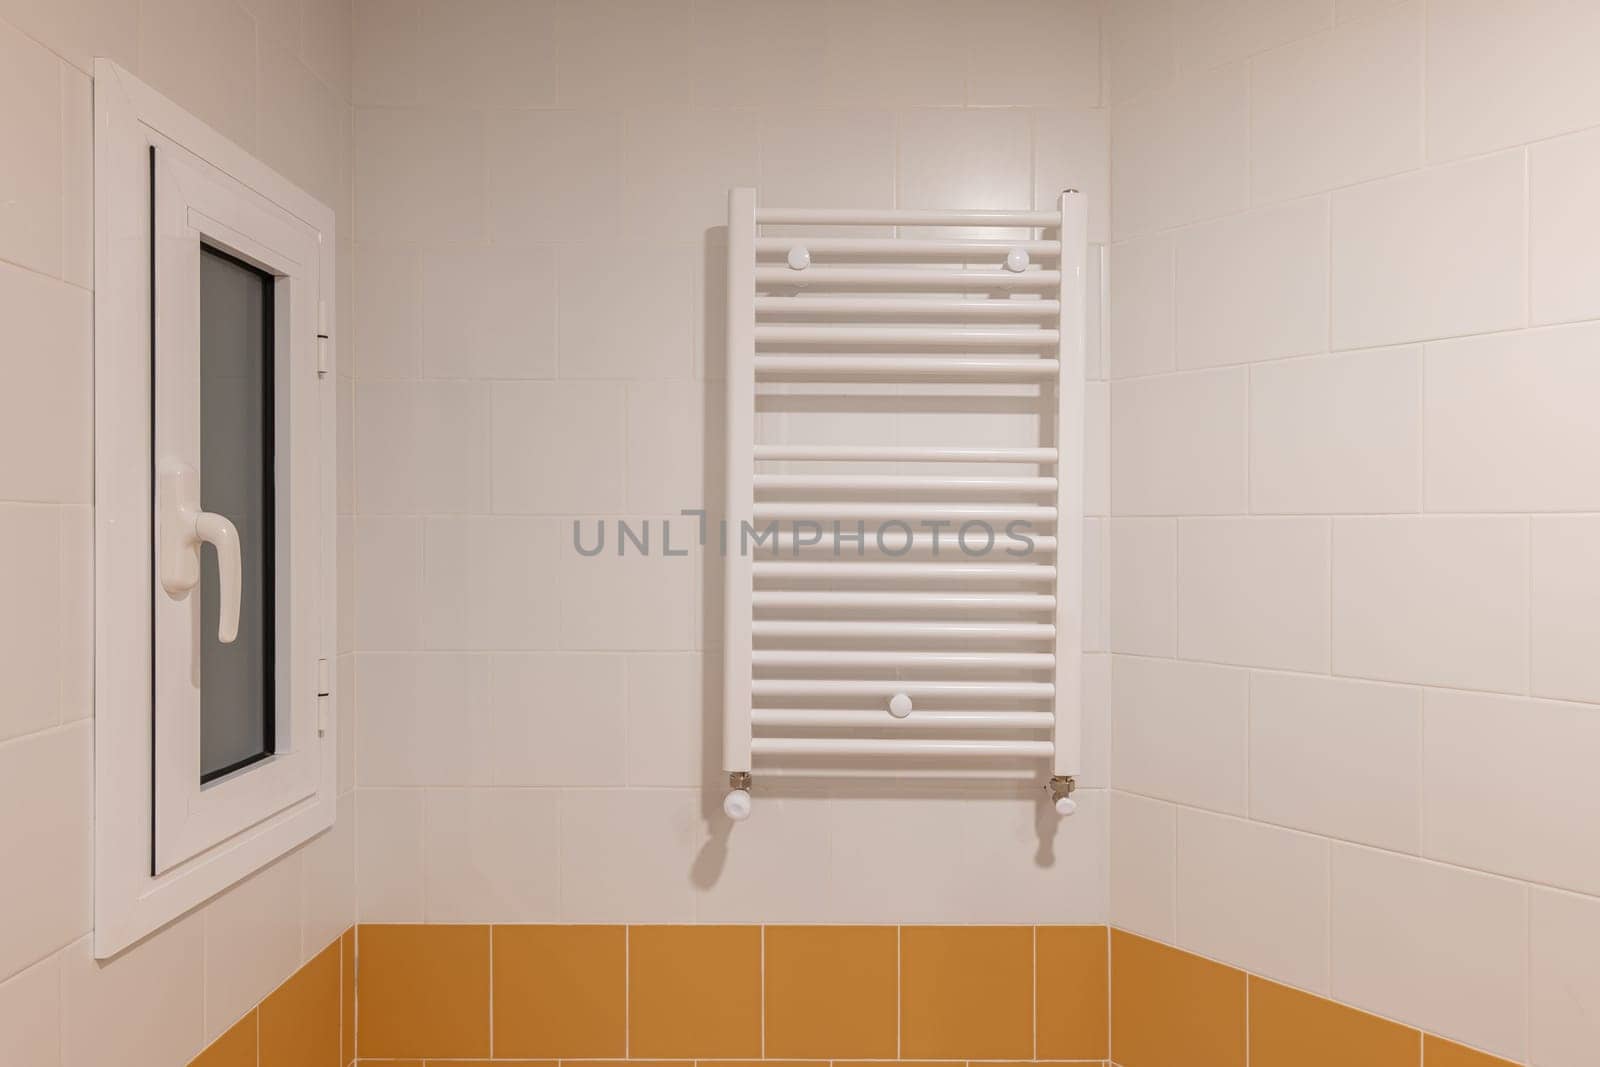 A Bathroom With Orange Tiles And A White Towel Rack by apavlin